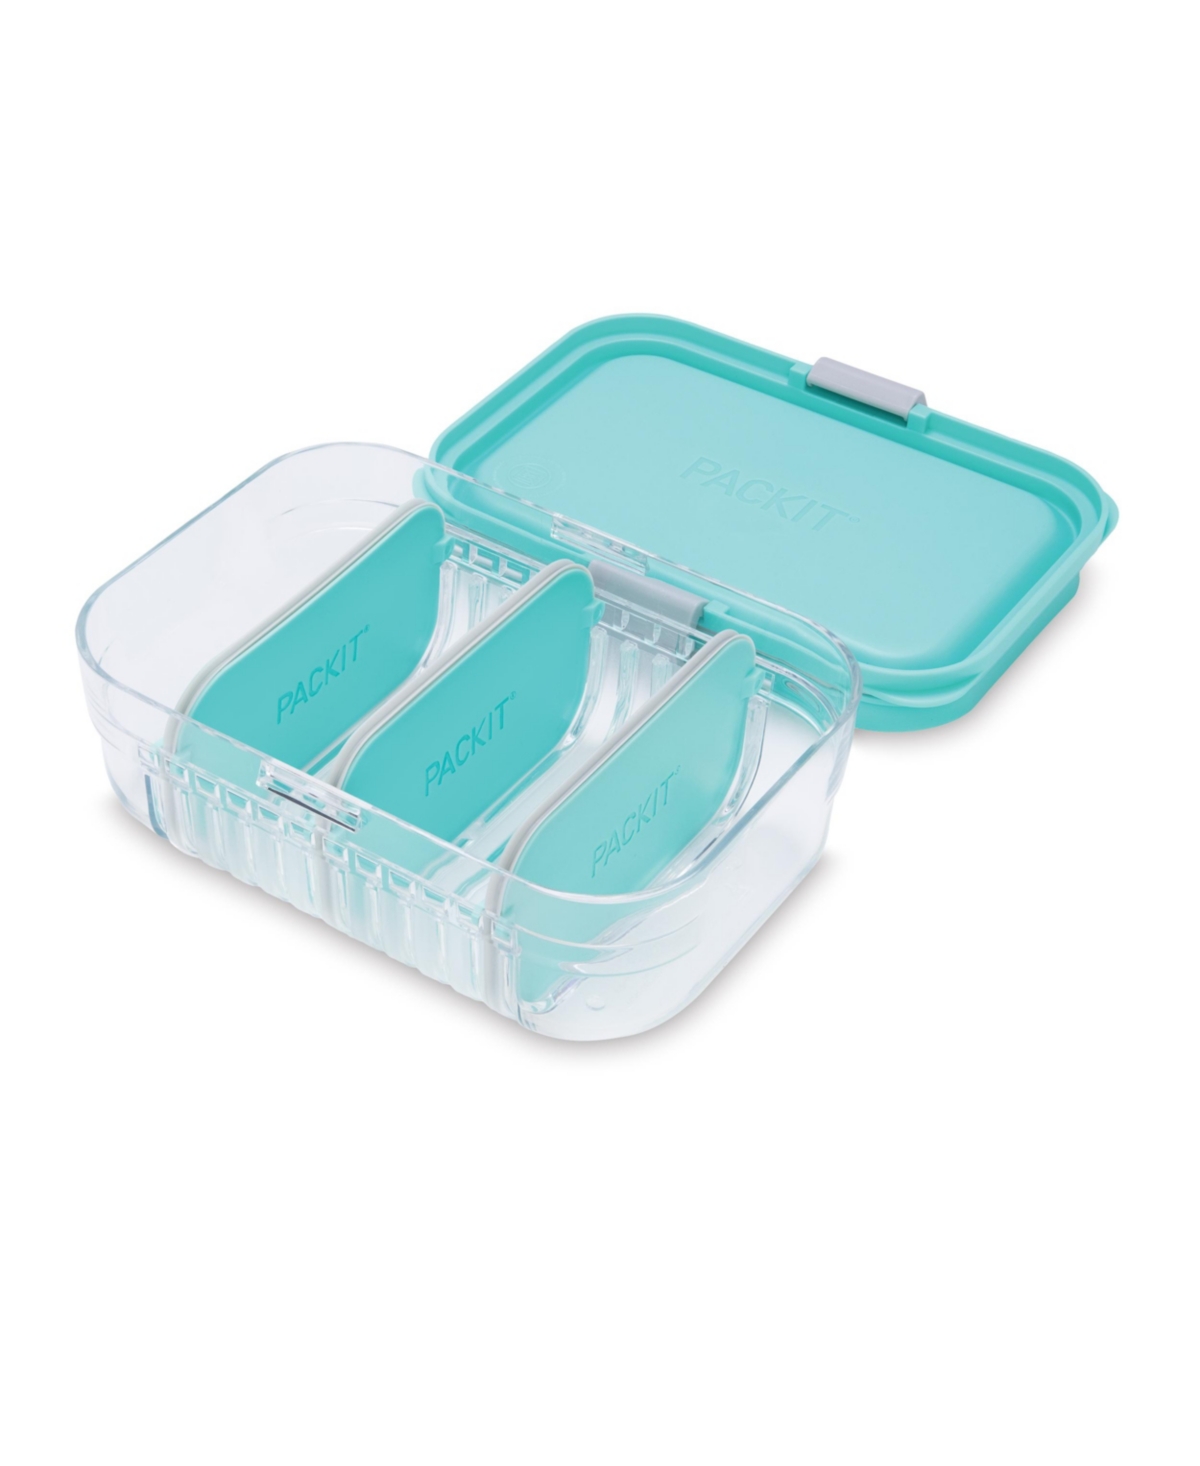 Pack It Mod Lunch Bento And Mod Snack Bento Set, 6 Piece In Mint